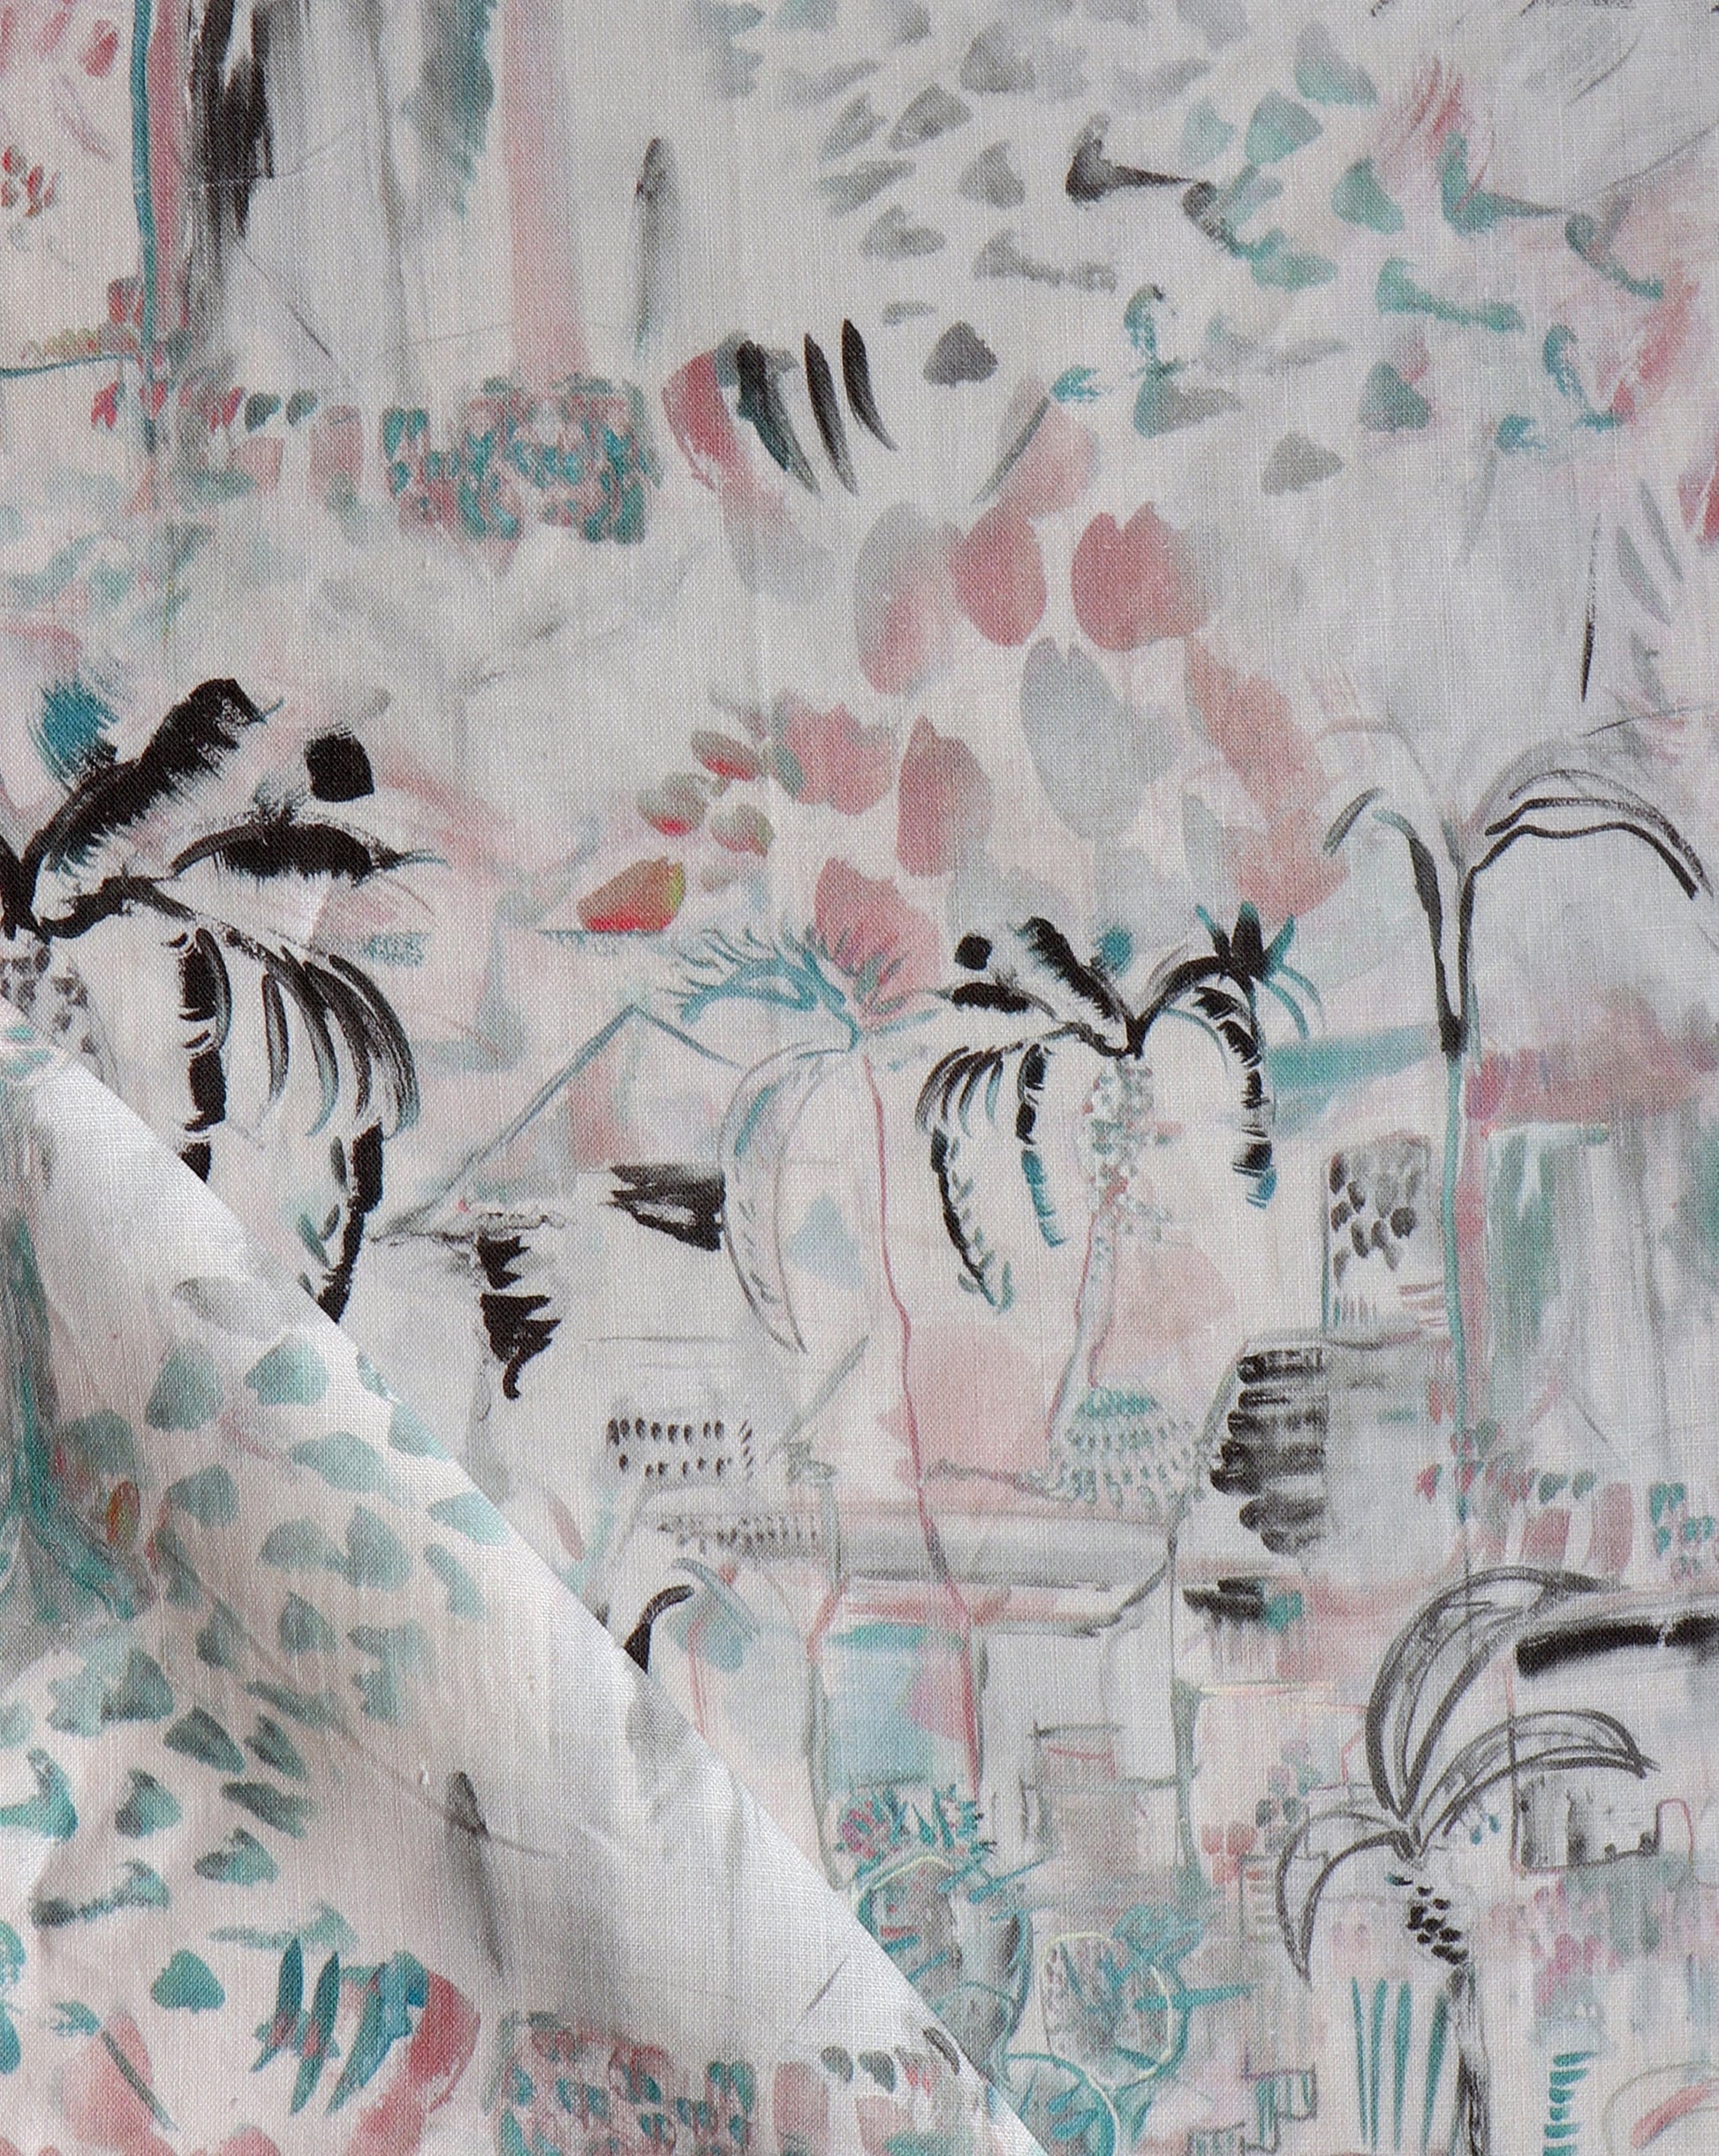 A close-up of a pink and blue Souk Fabric with palm trees on it at Marrakech's Souk